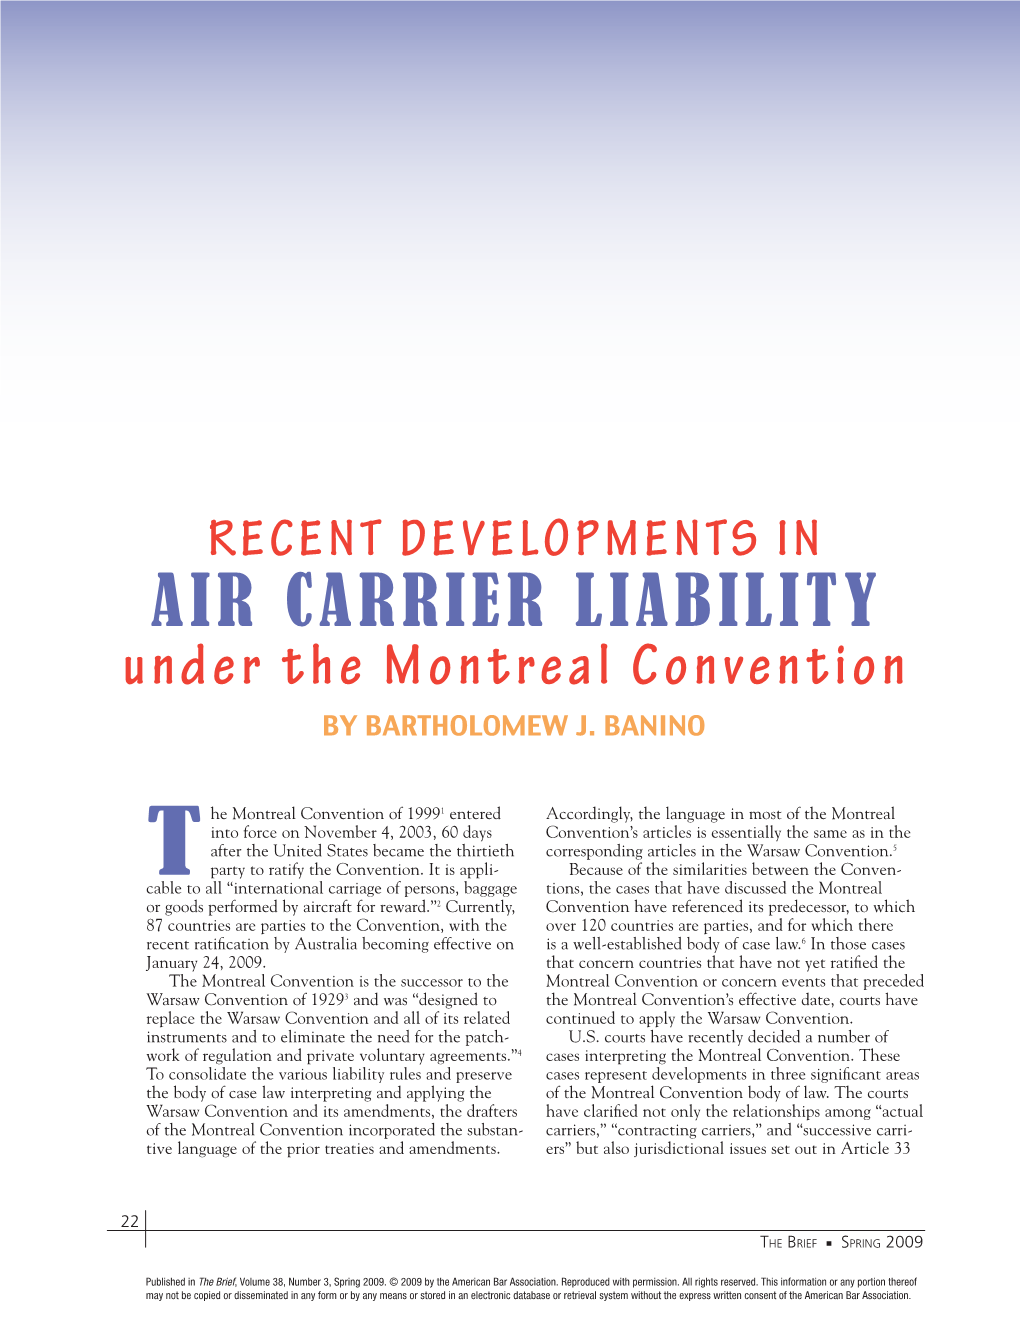 AIR CARRIER LIABILITY Under the Montreal Convention by BARTHOLOMEW J